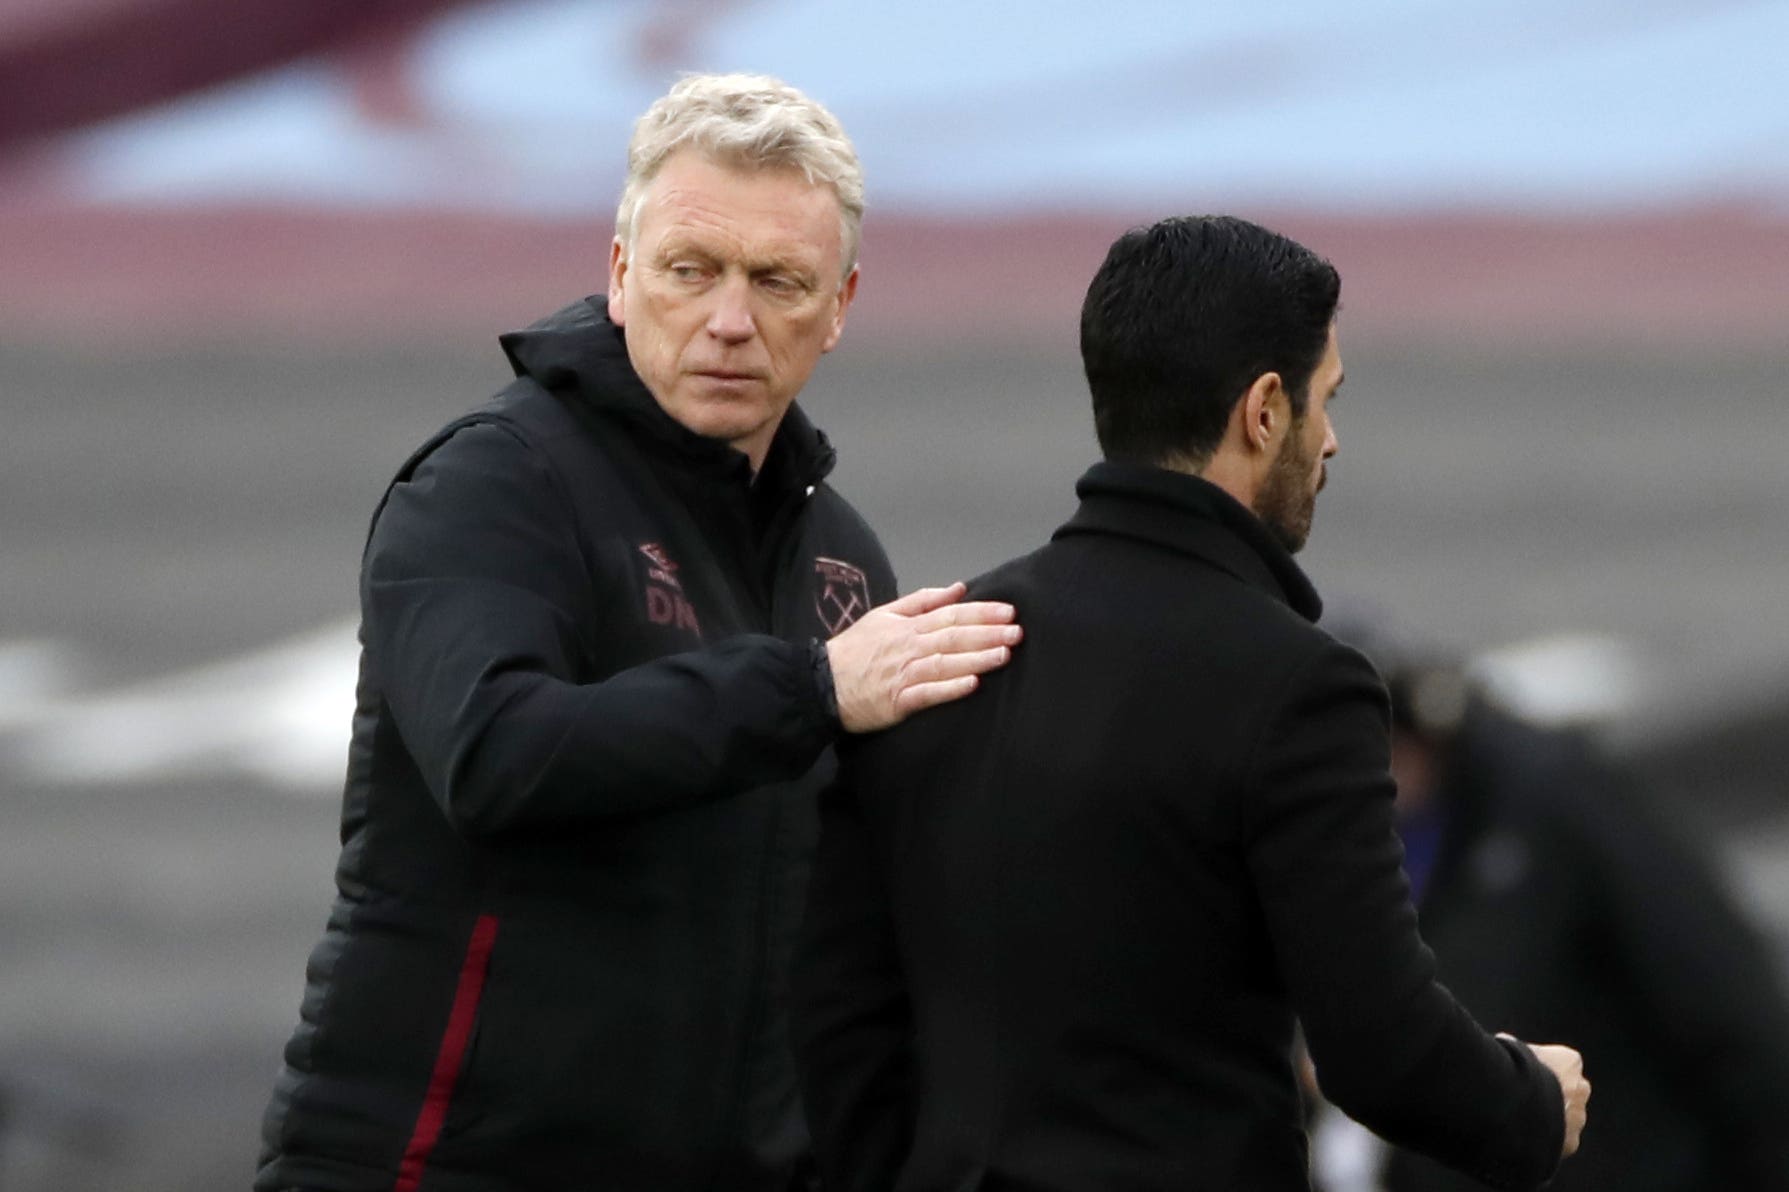 Mikel Arteta (right) says he has learned a lot from his former boss at Everton, David Moyes (Paul Childs/PA)